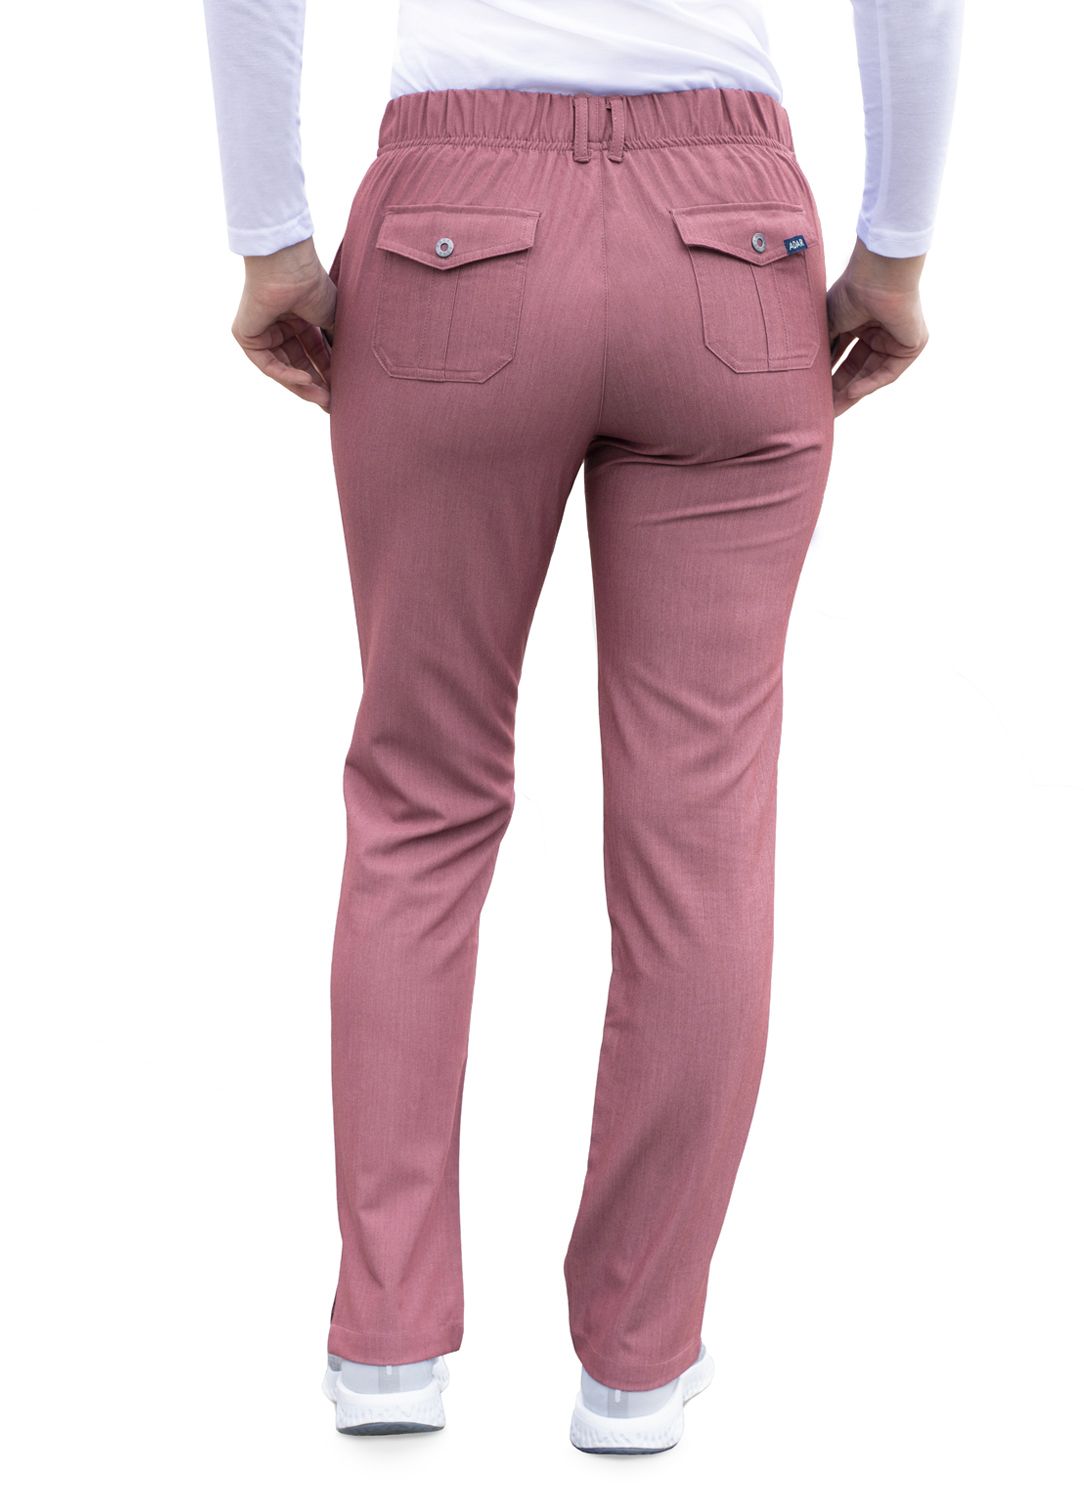 Adar Collection Heather Wine-  Pro  6 POCKET PANT by Adar